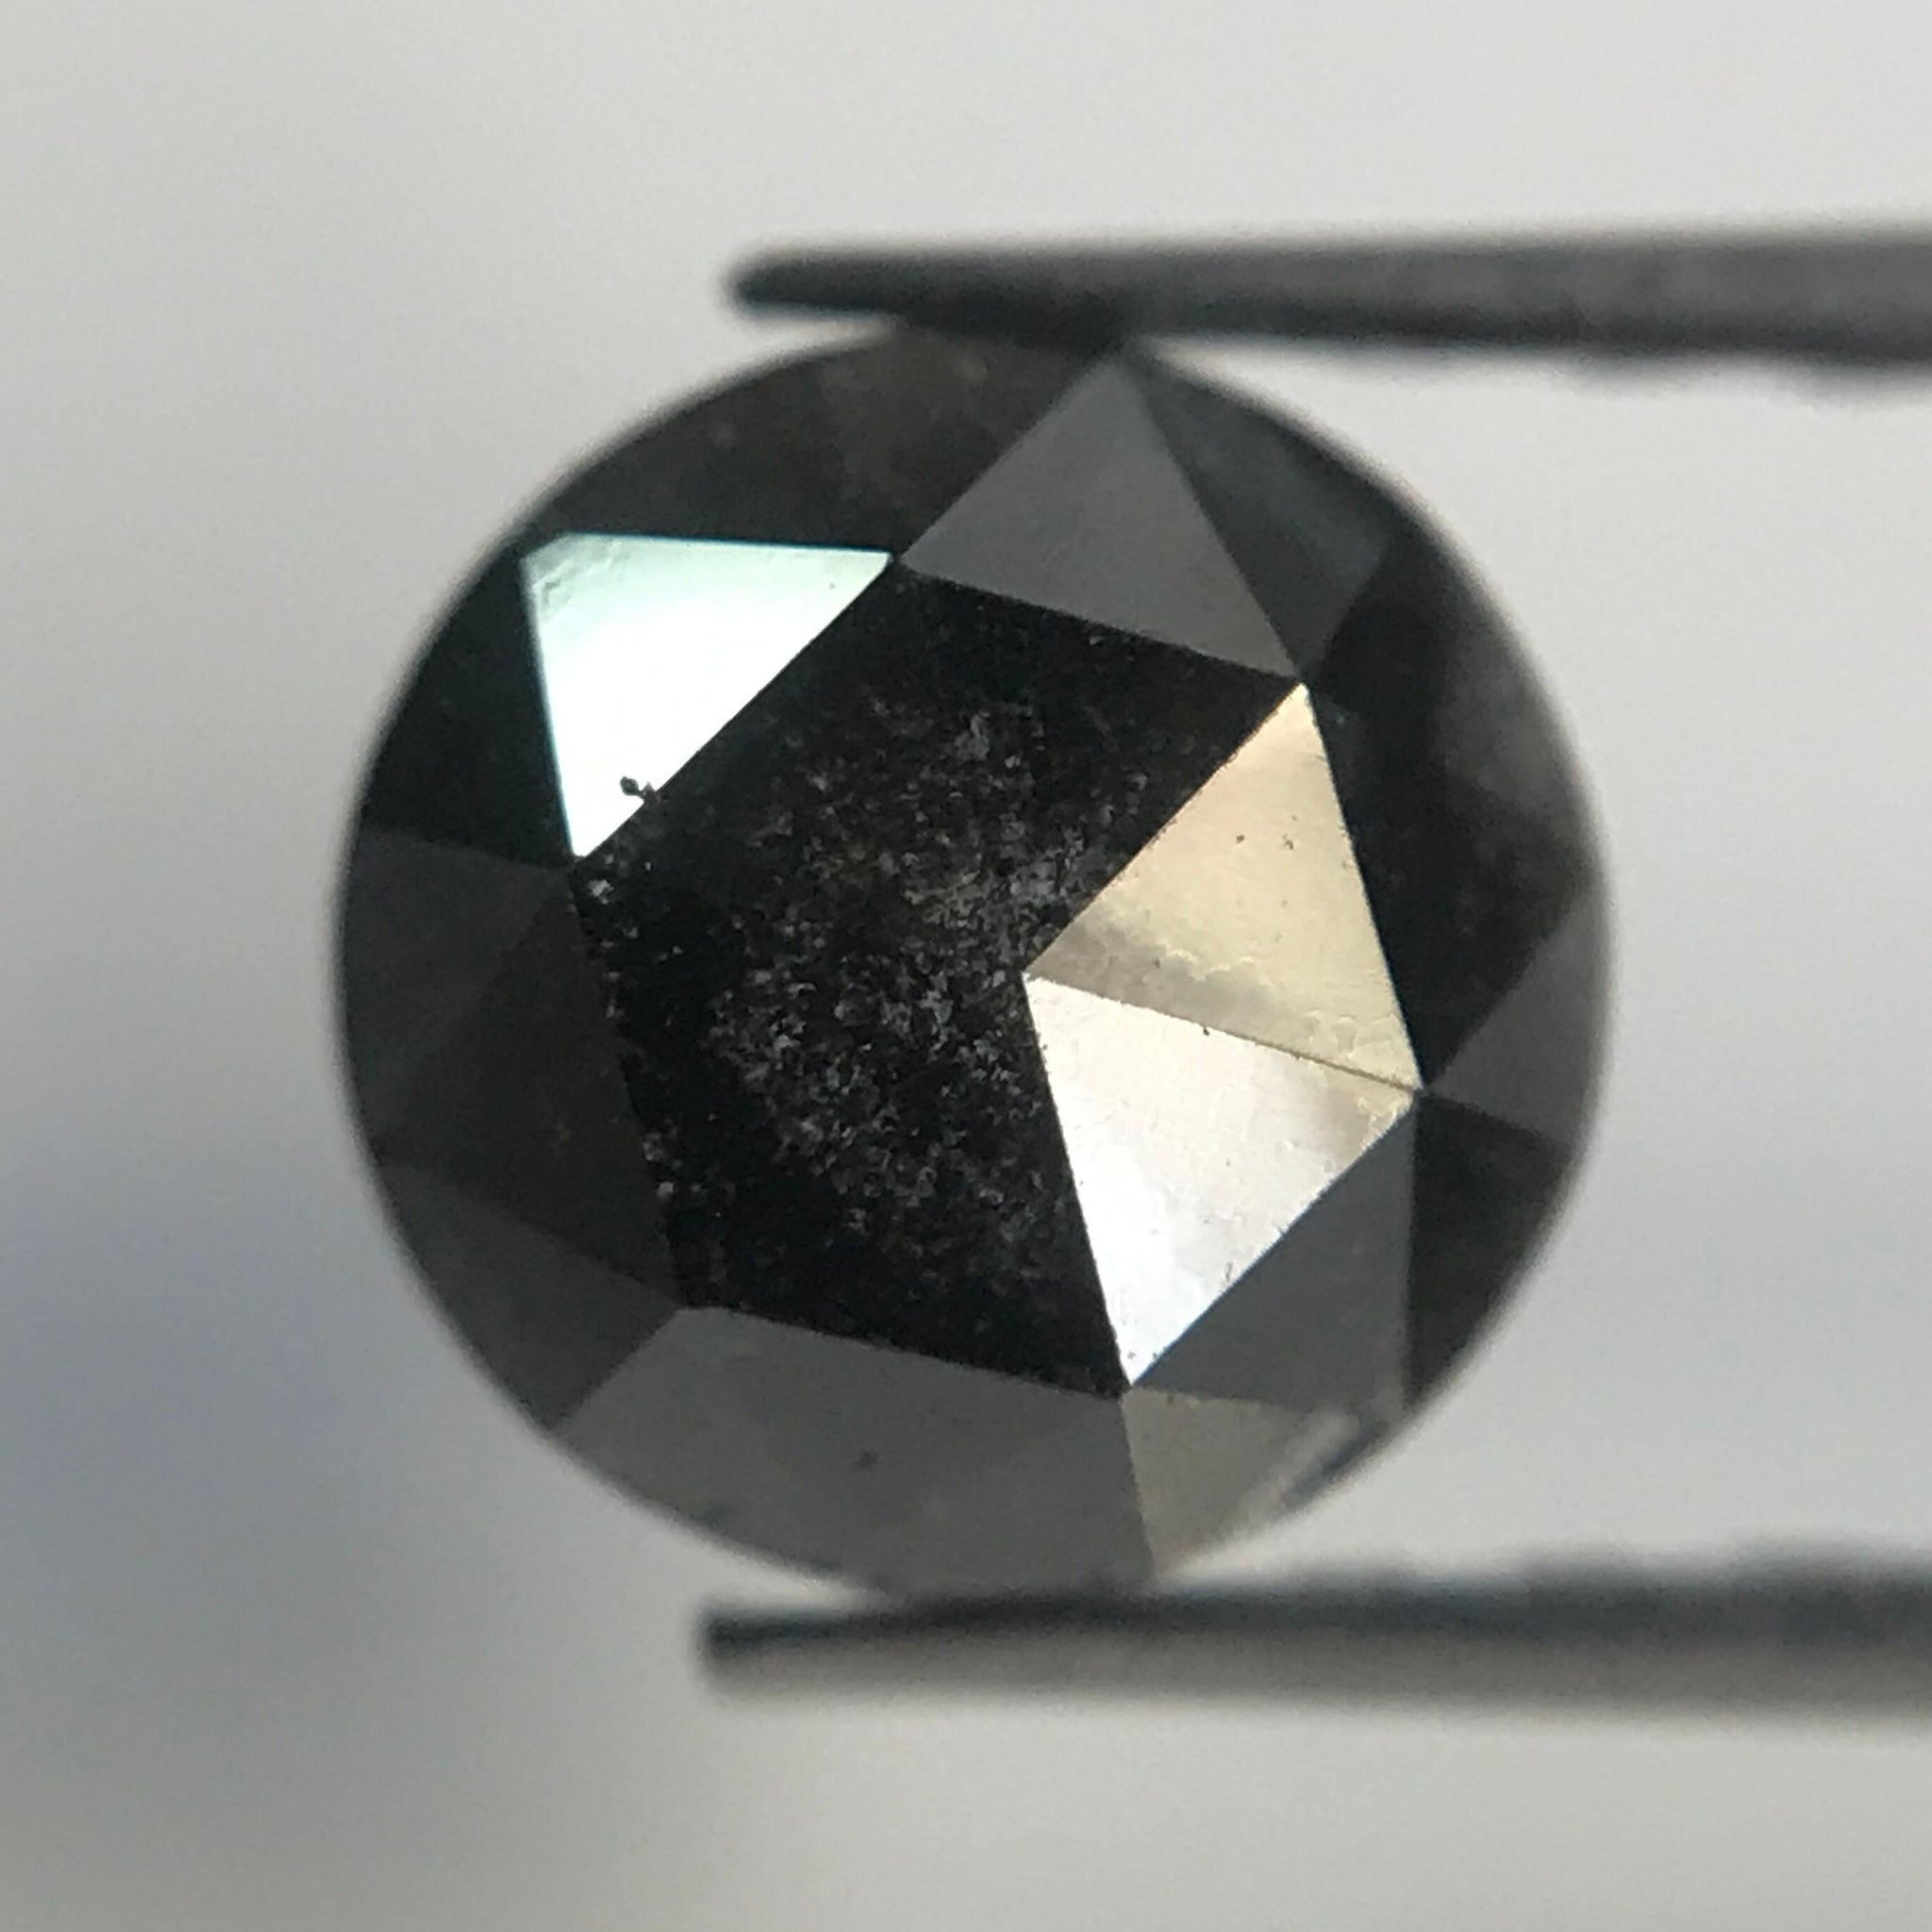 1.02 Ct 5.91 mm X 3.07 mm Round Shape Rose Cut Black Natural Loose Diamond, Salt and Pepper Loose Diamond Use For Jewelry SJ06/35